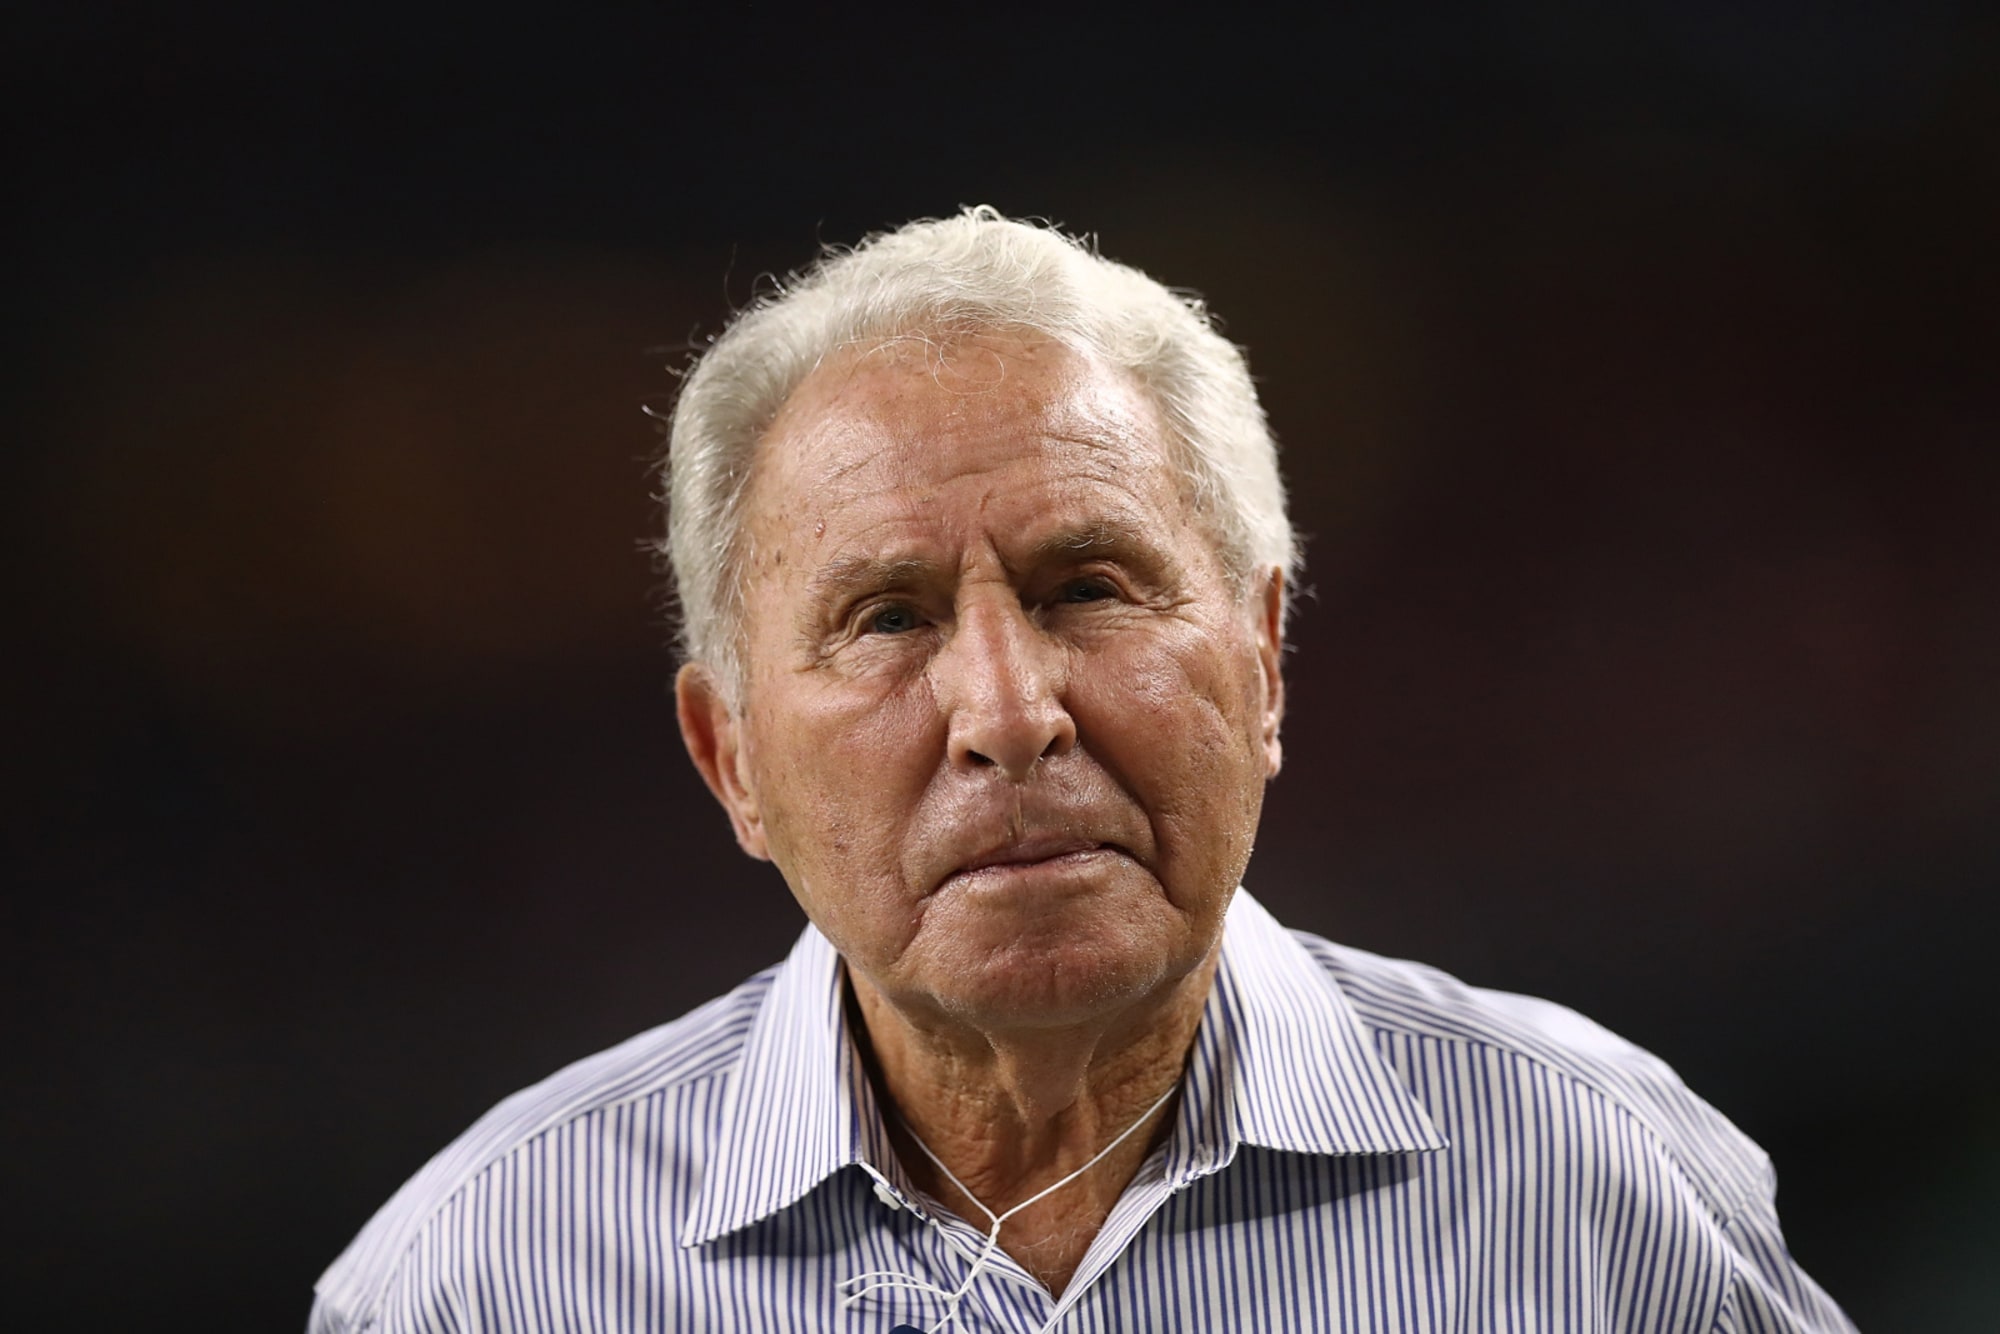 ESPN's College GameDay: How old is Lee Corso?